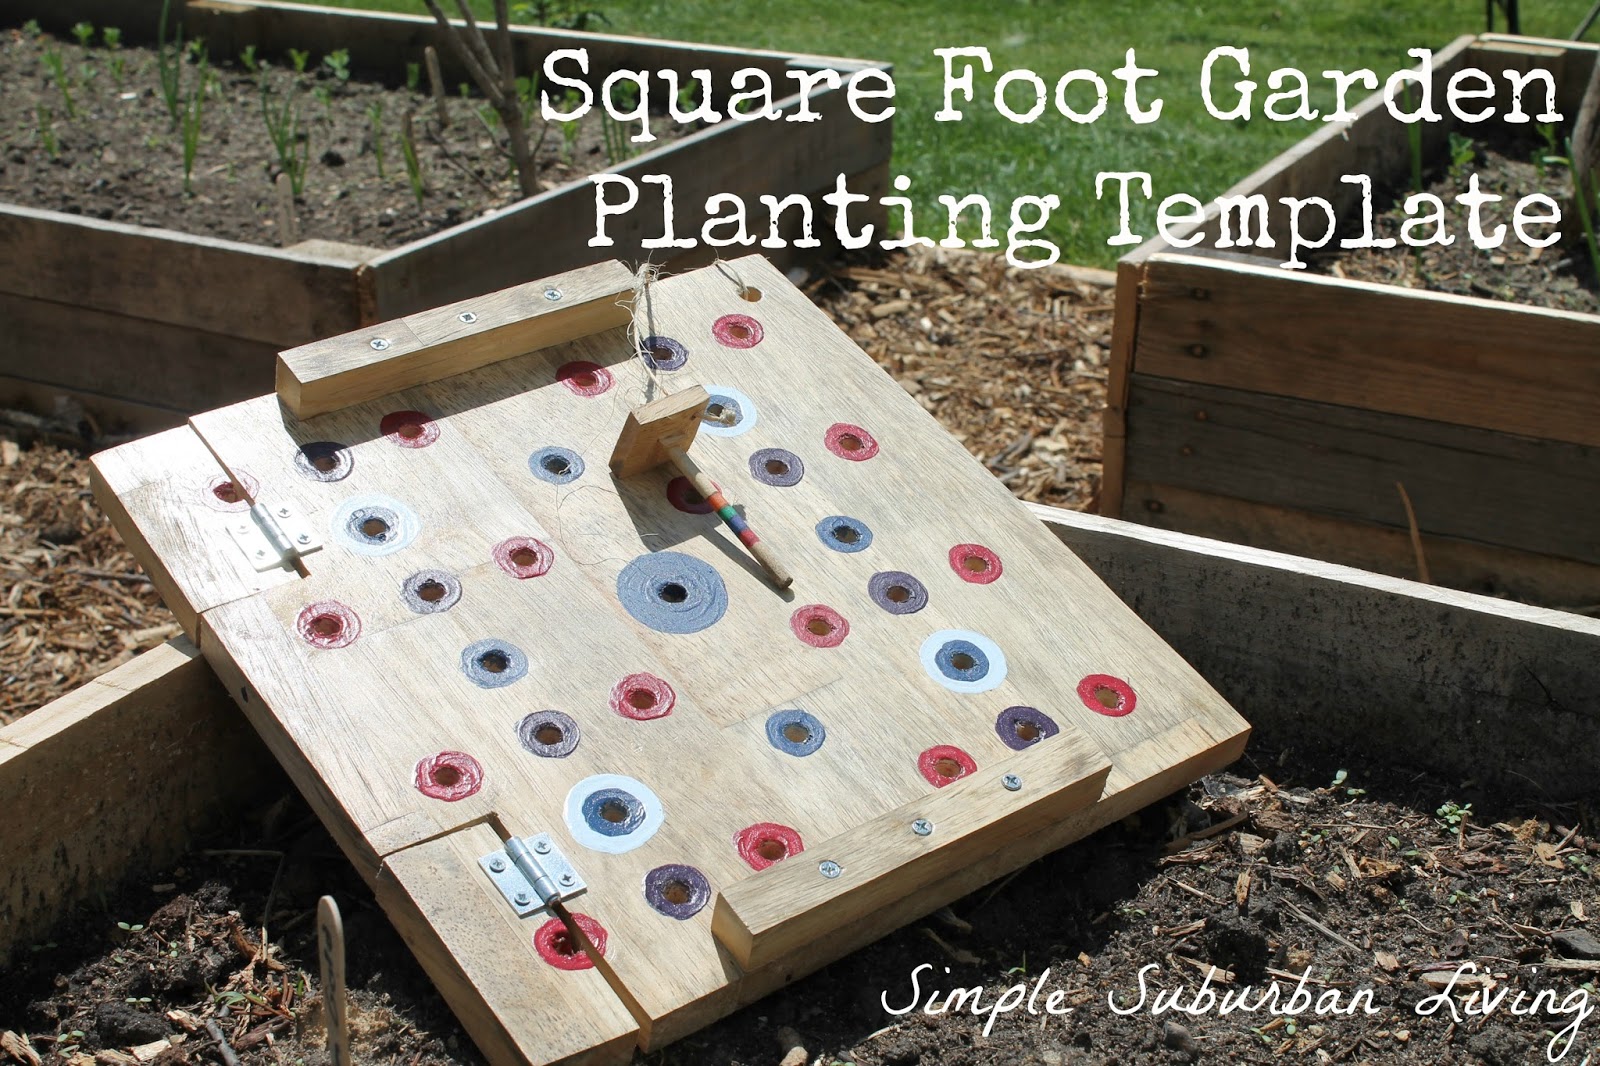 Square Foot Garden Planting Template Simple Suburban Living